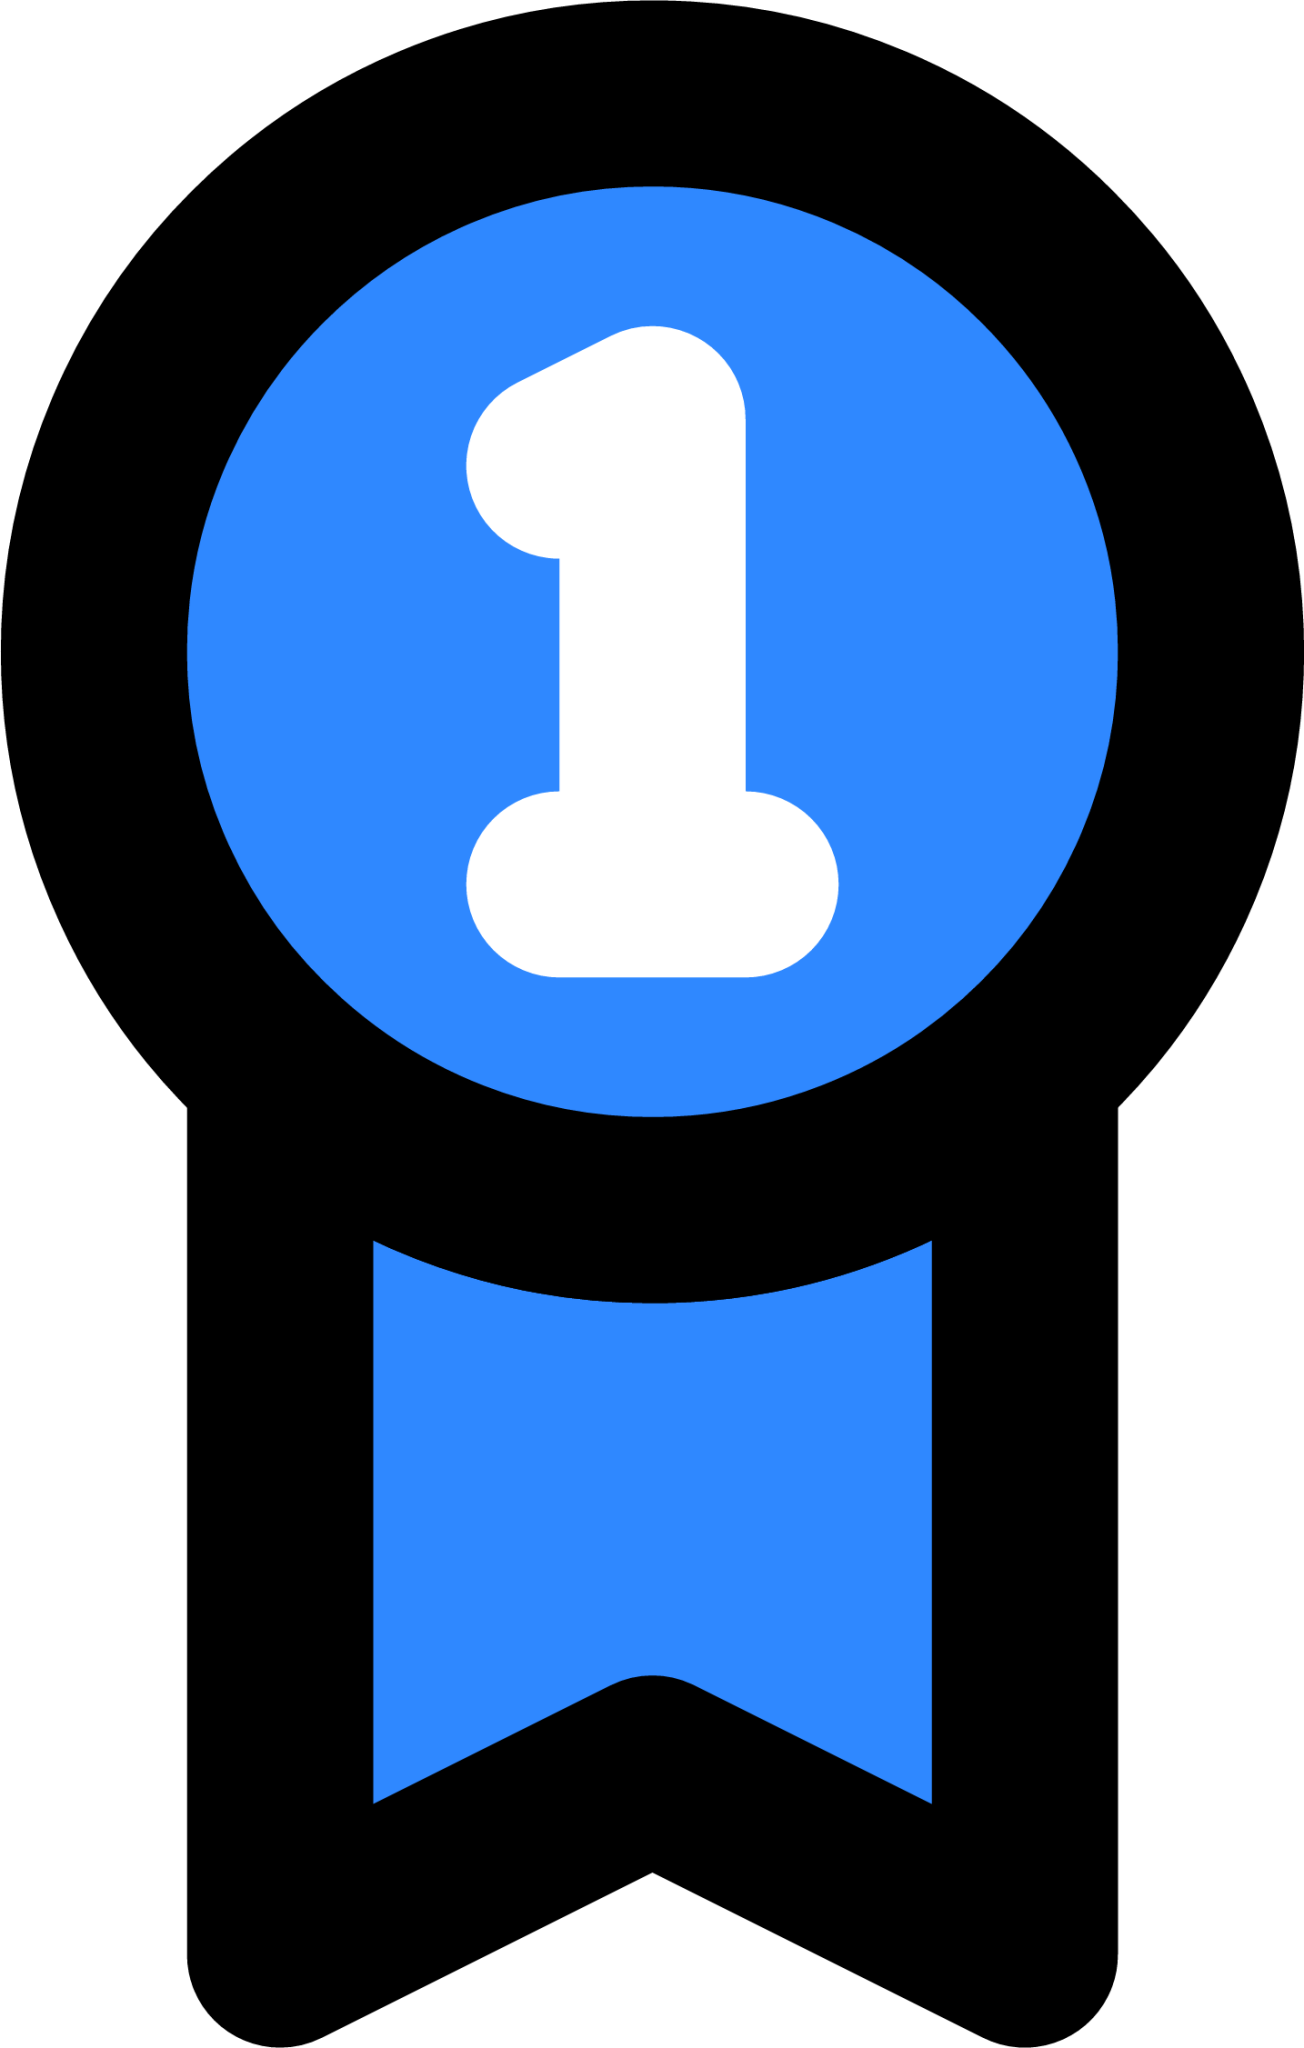 badge two icon